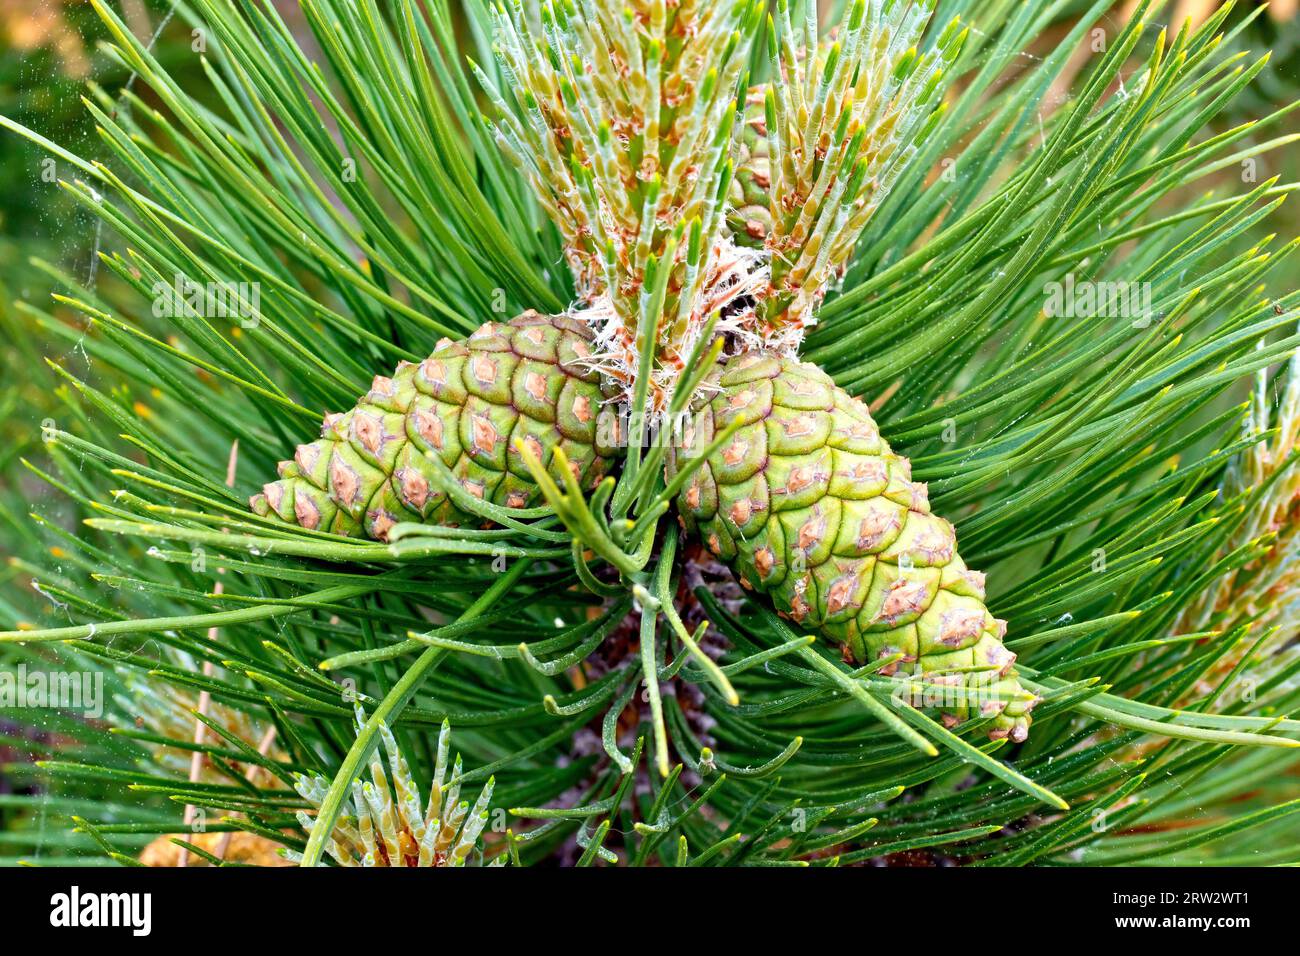 Black Pine (pinus nigra), close up showing a couple of green immature pine cones growing from the end of a branch of the tree. Stock Photo